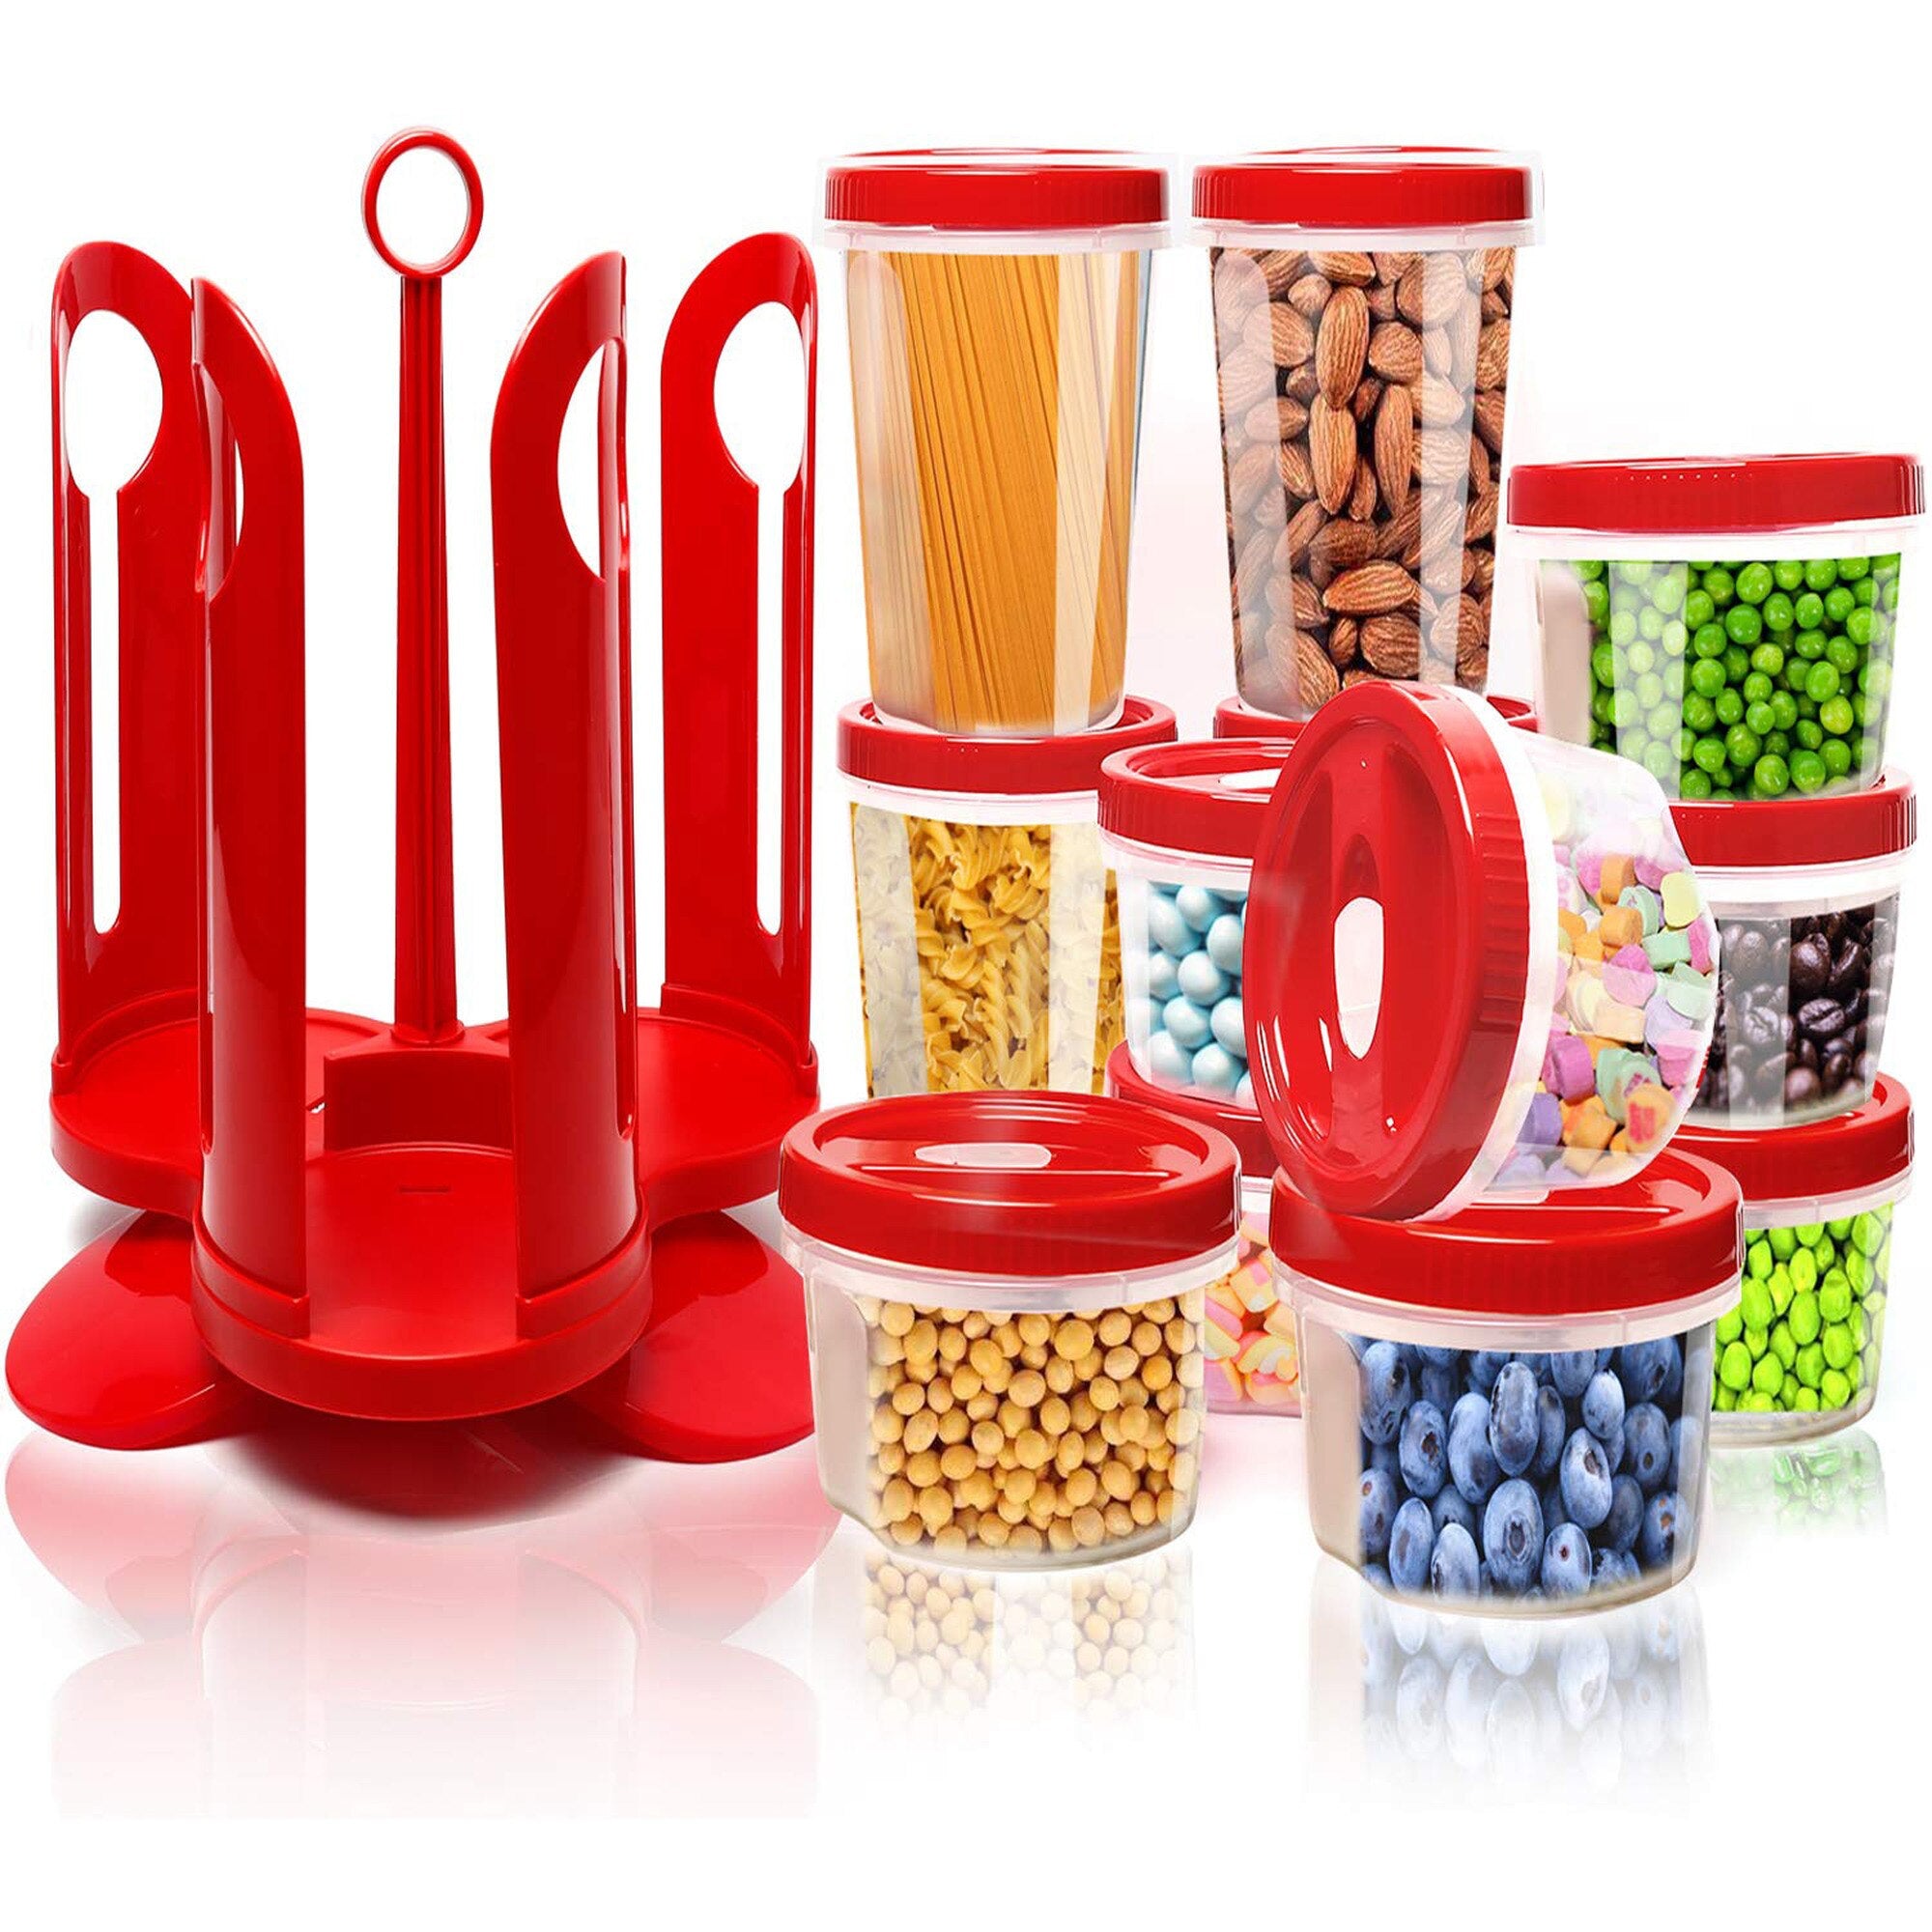 CROFTON 50 Pc Food Storage set (Includes 25 Containers and 25 Lids) 50 –  STARSIDE DRUGS (安康宁网上药店)